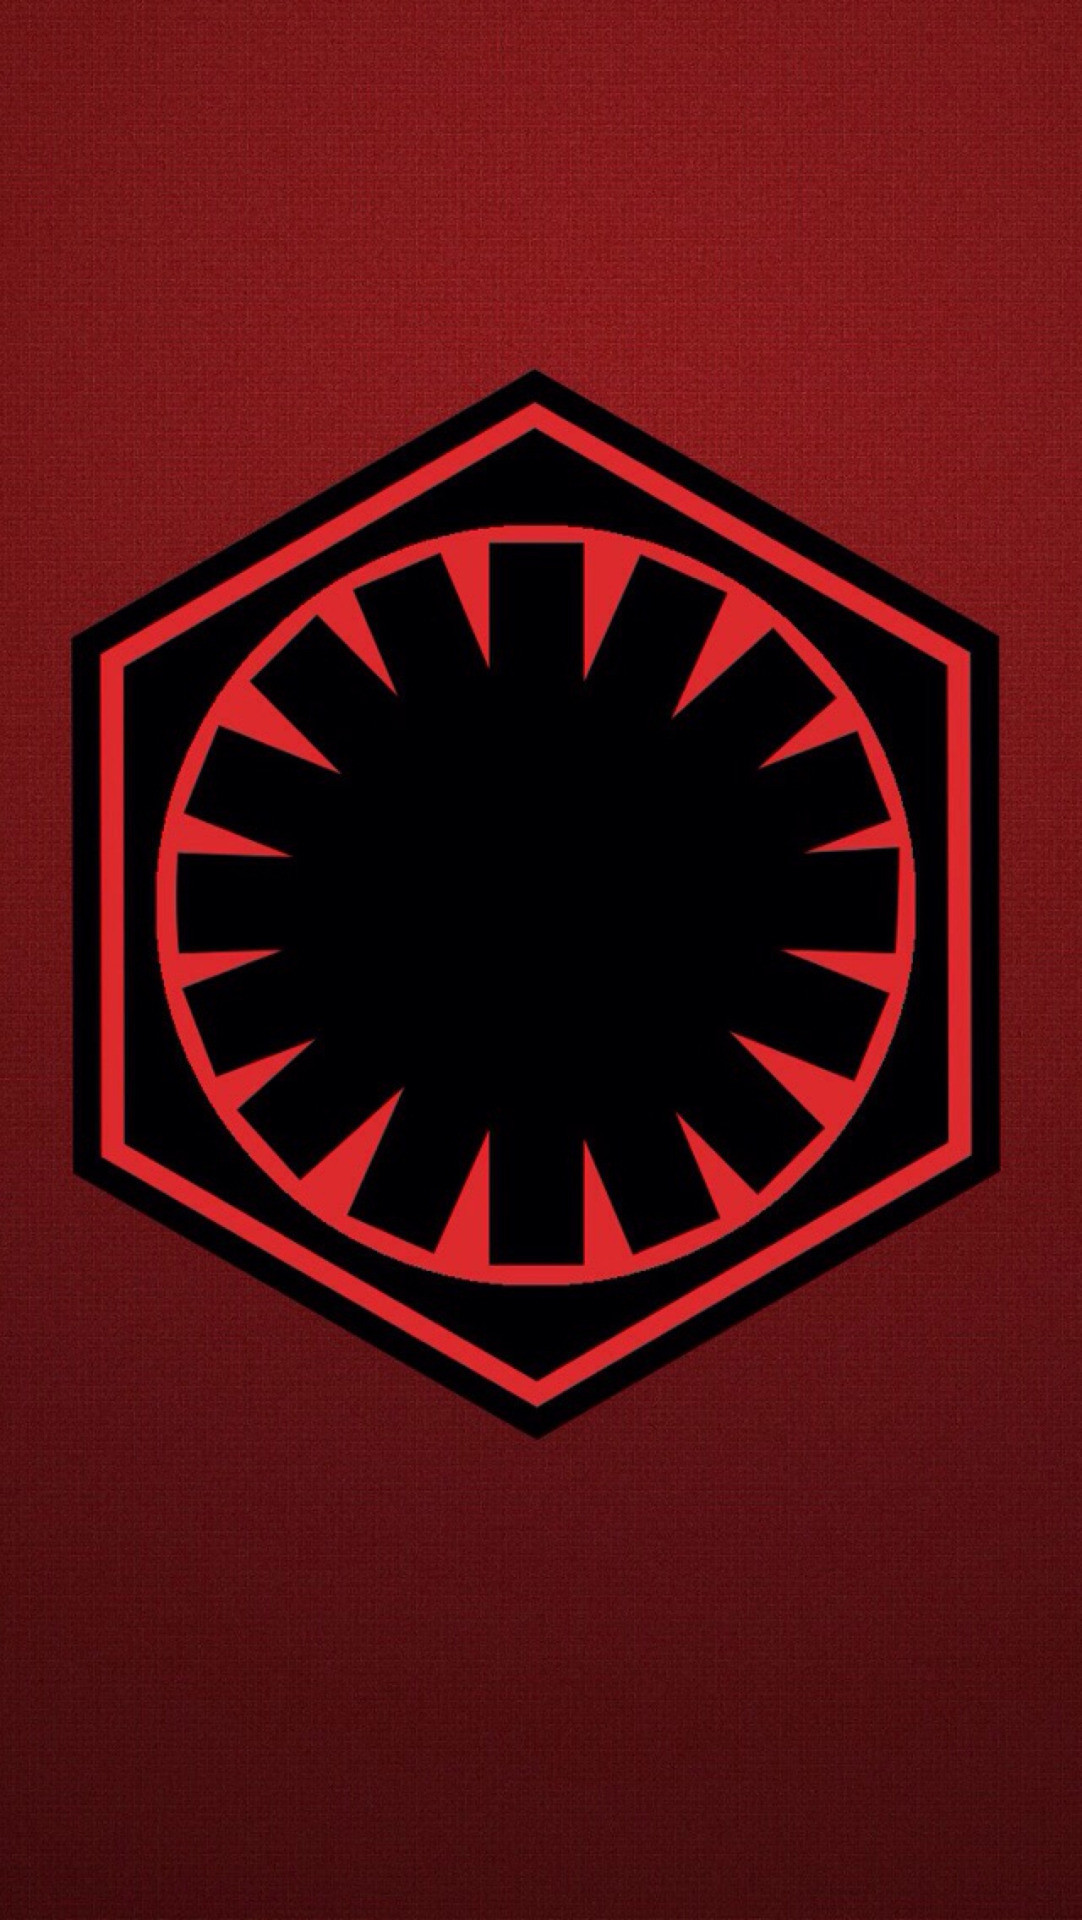 First Order iPhone wallpaper. I thought you all would enjoy Happy